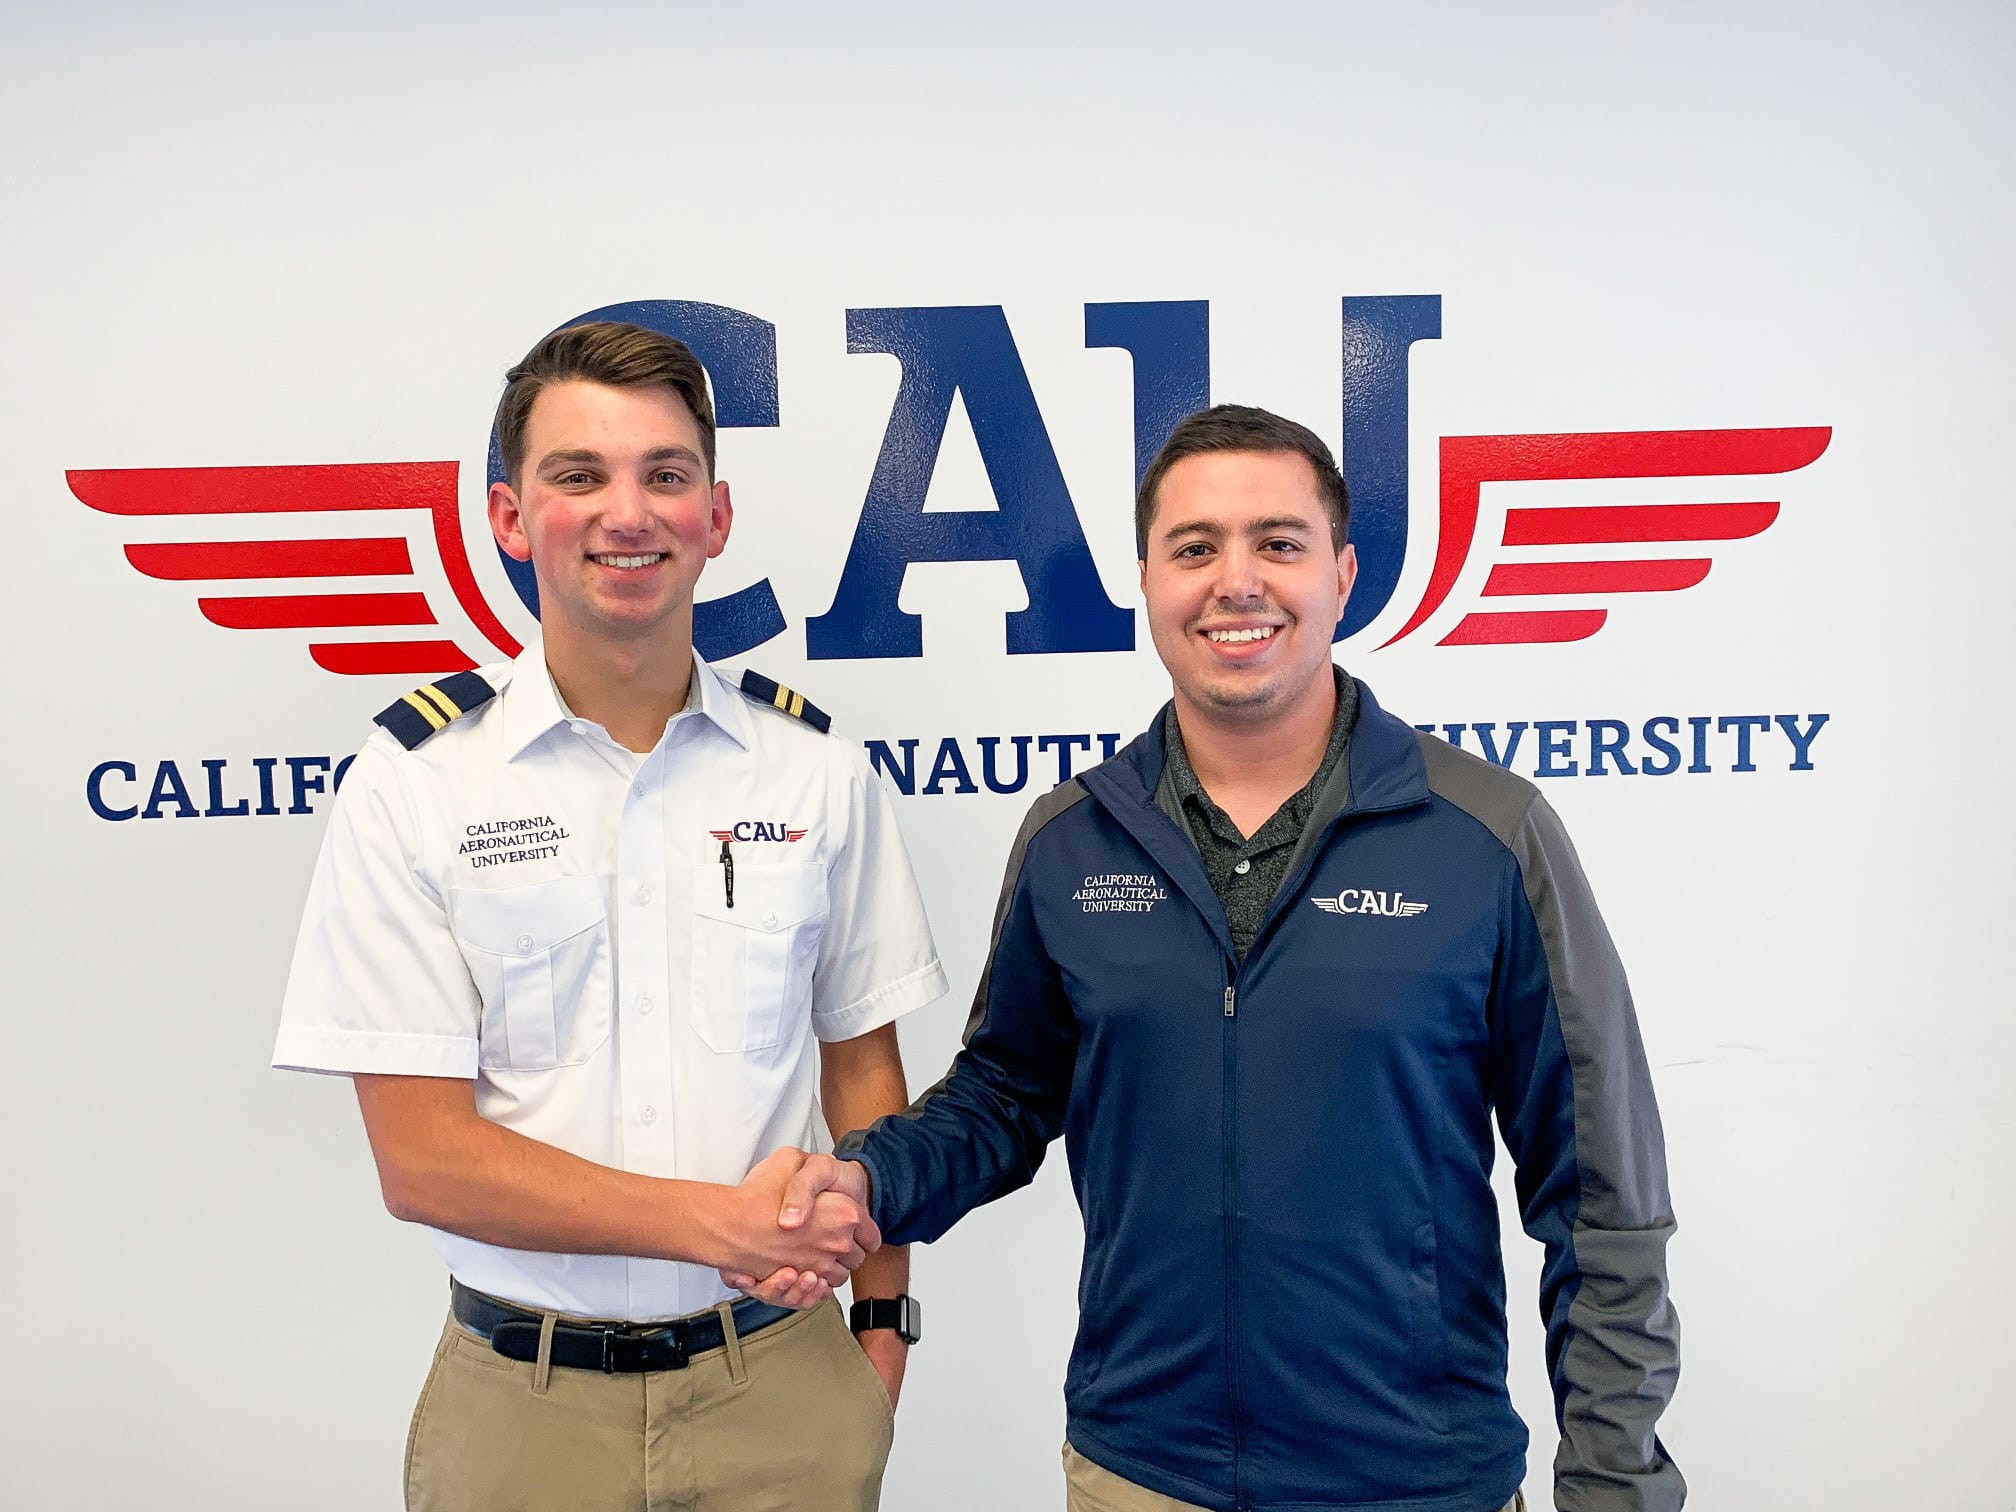 Prepare for Your Pilot Interview With Your Bachelor of Science in Aeronautics Degree - California Aeronautical University